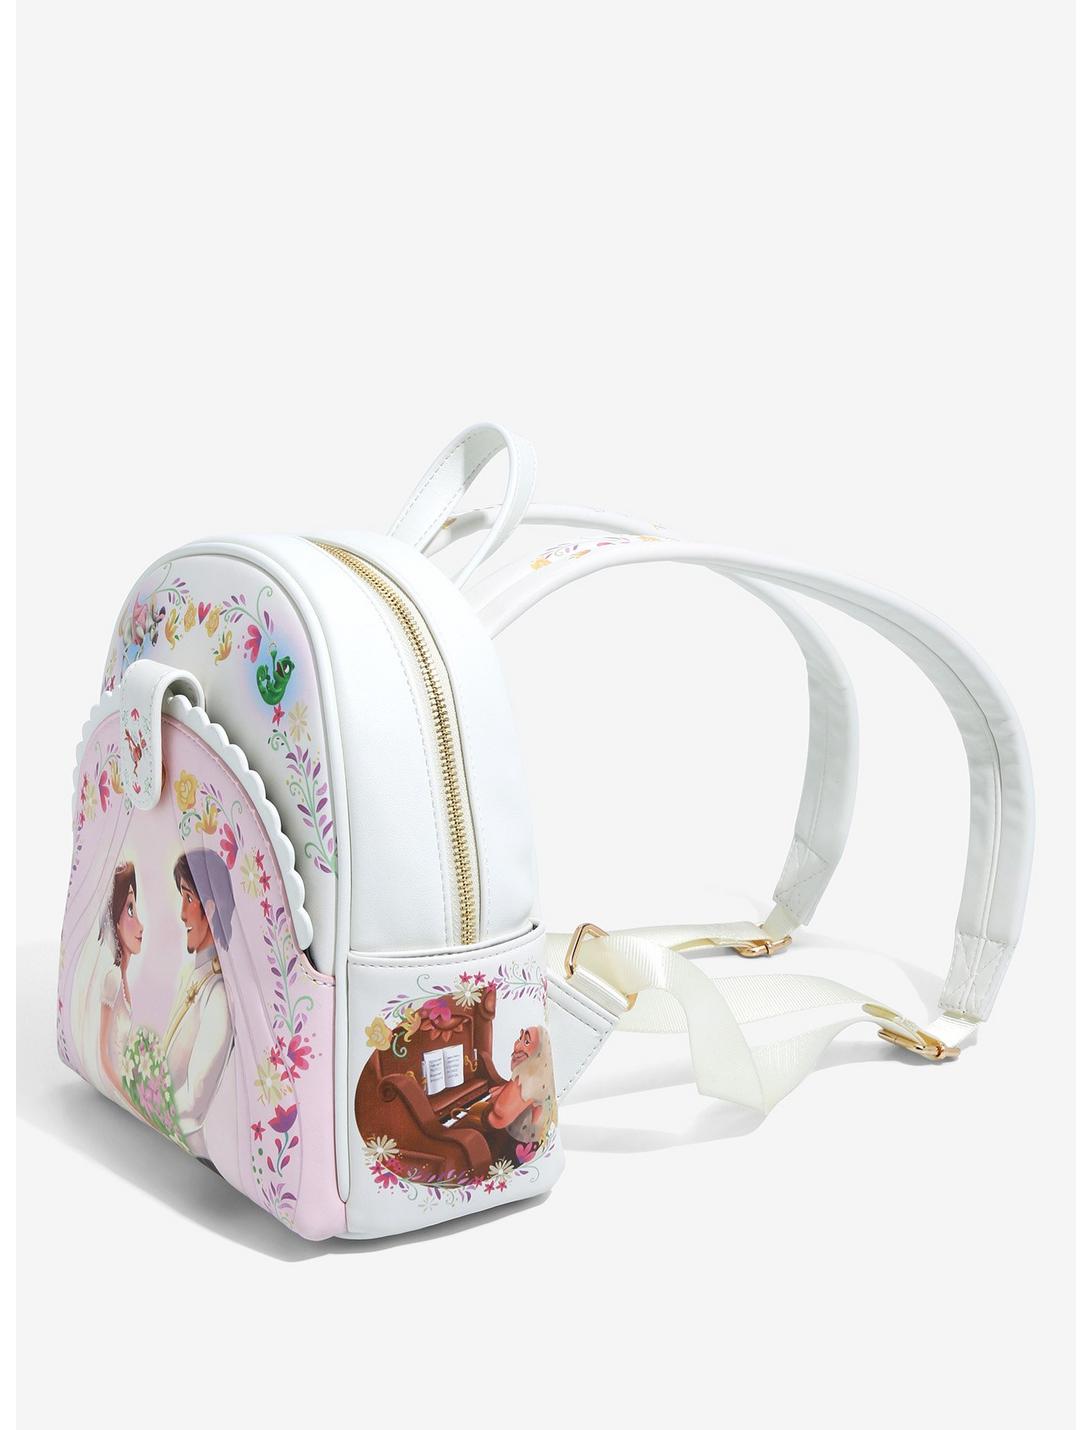 Danielle Nicole, Bags, Disney Beauty And The Beast Loungefly Backpack